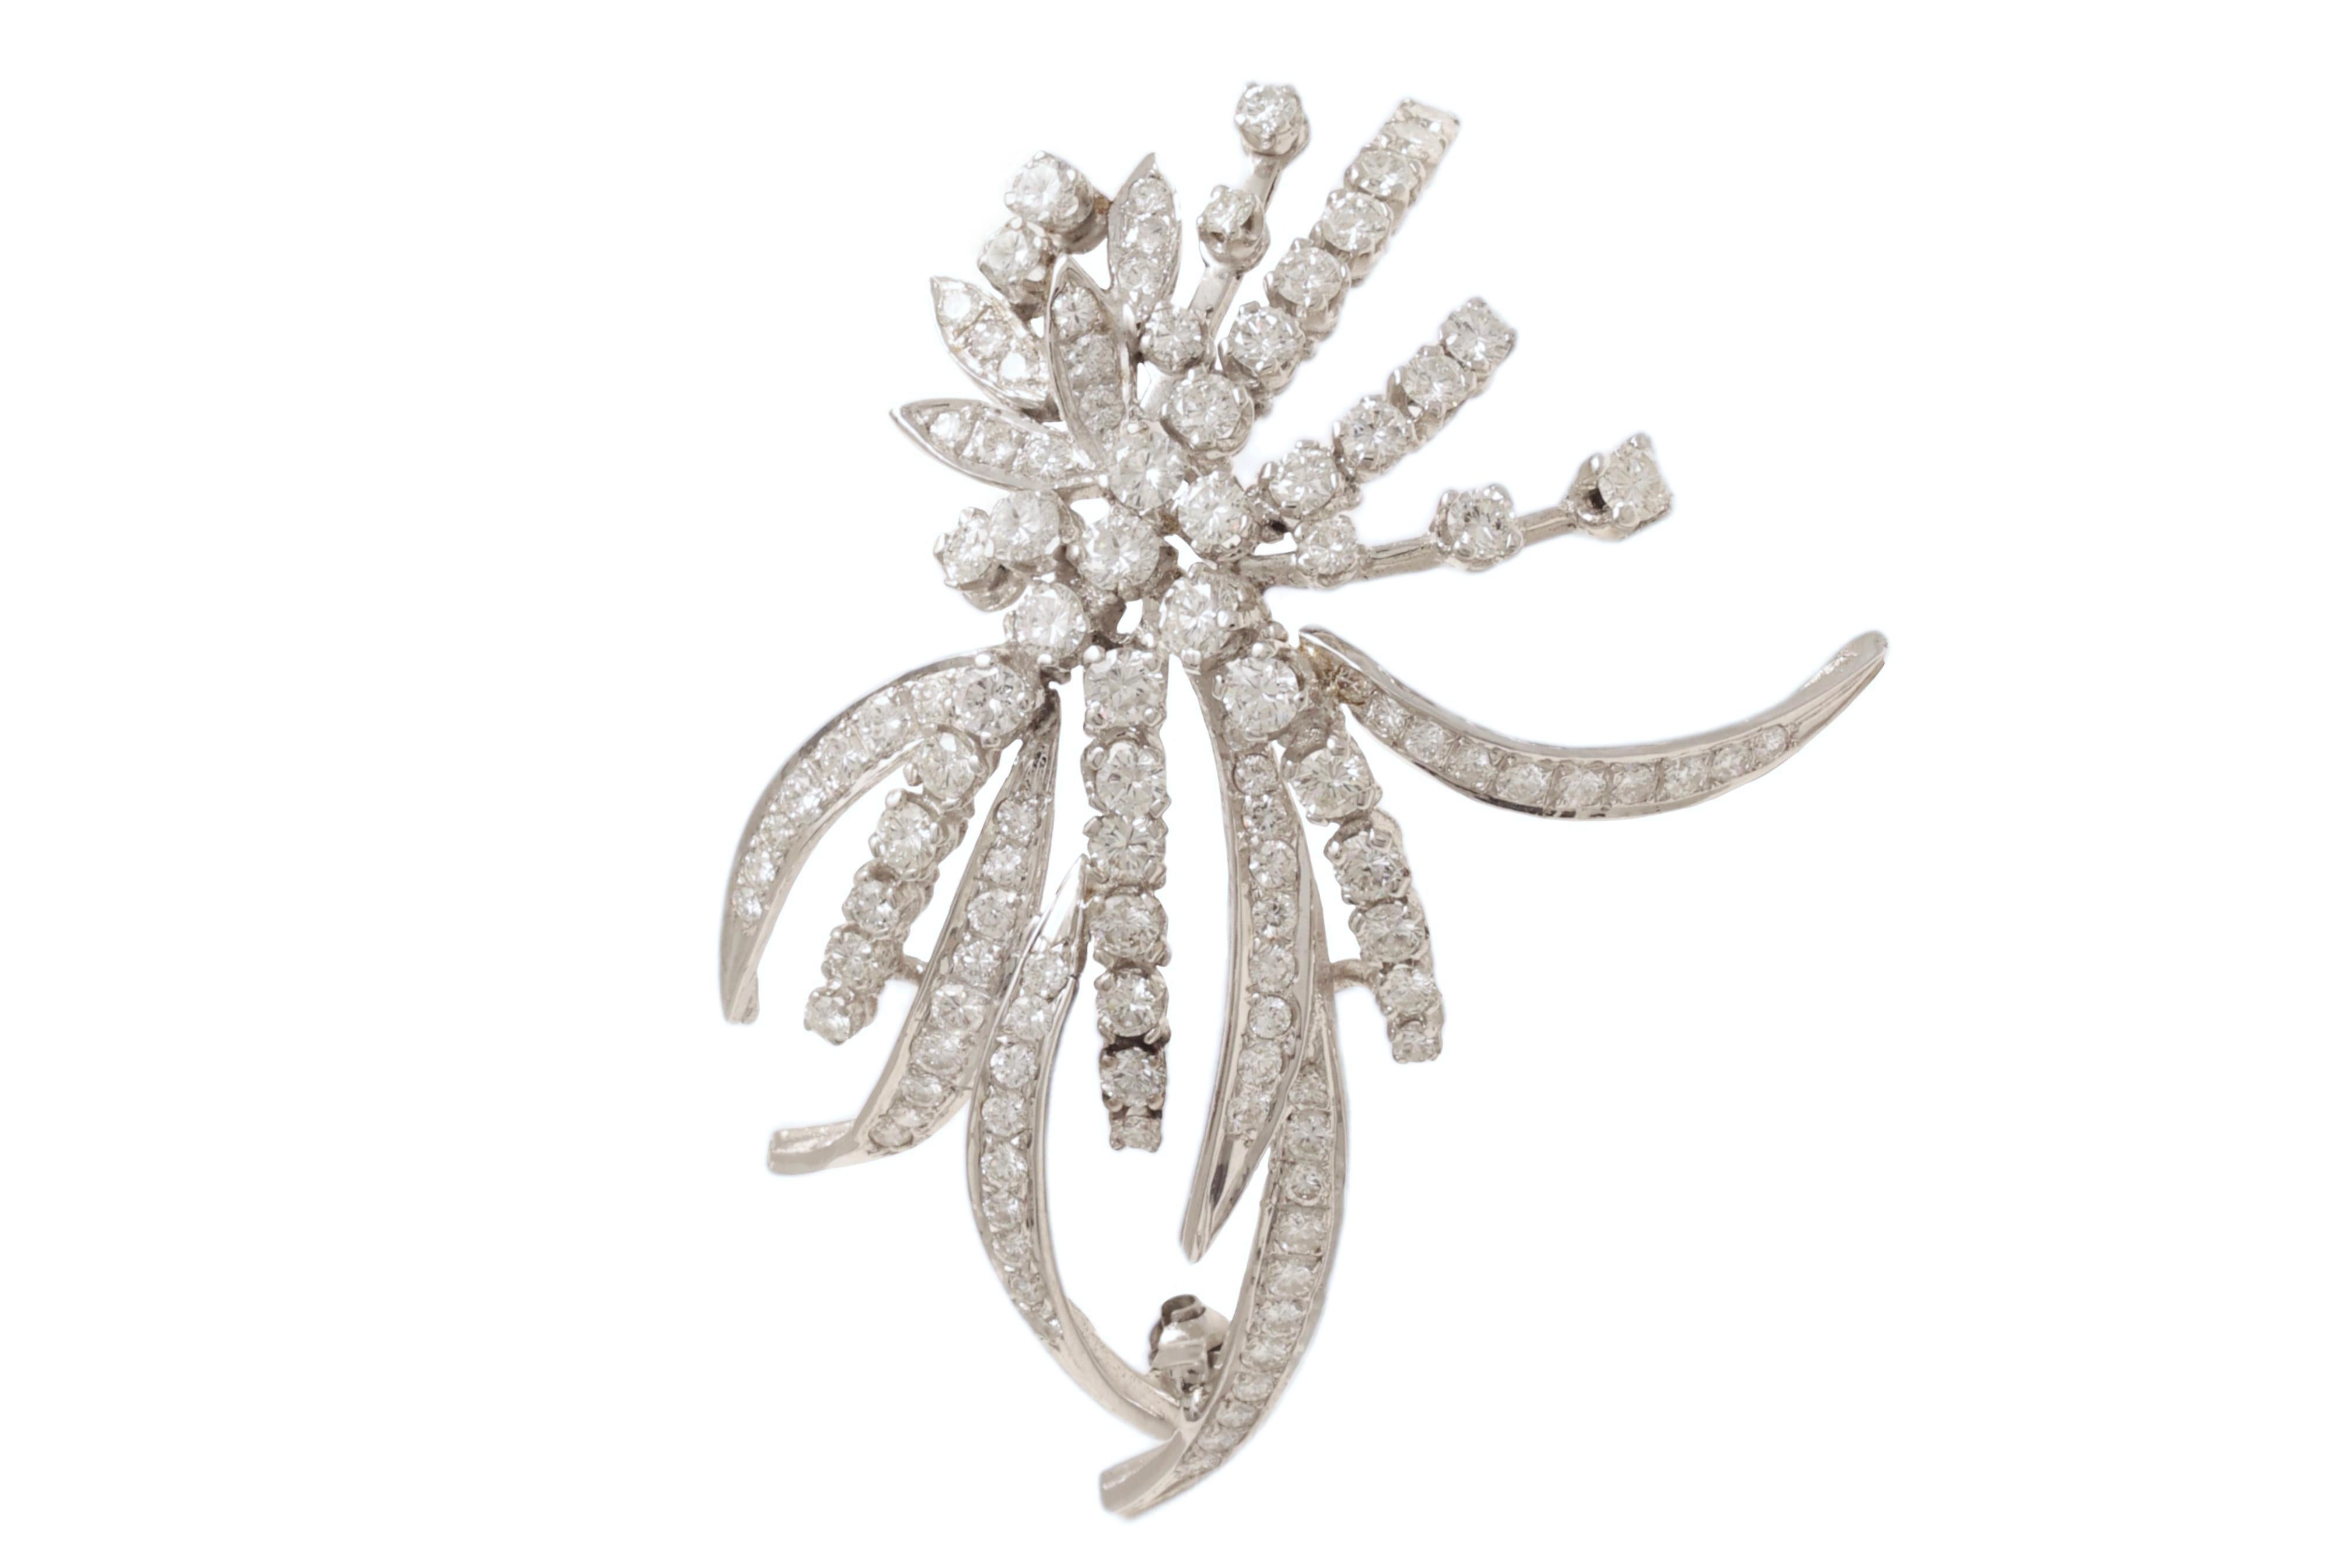 Gorgeous 18 kt. White Gold Brooch set with 6.5 ct. Brilliant cut Diamonds

Diamonds: Brilliant cut diamonds together 6.5 ct. 

Material: 18 kt. White Gold

Measurements: 57 mm x 45 mm x 11.8 mm

Total weight: 15.3 gram / 0.540 oz / 9.8 dwt

Brooch